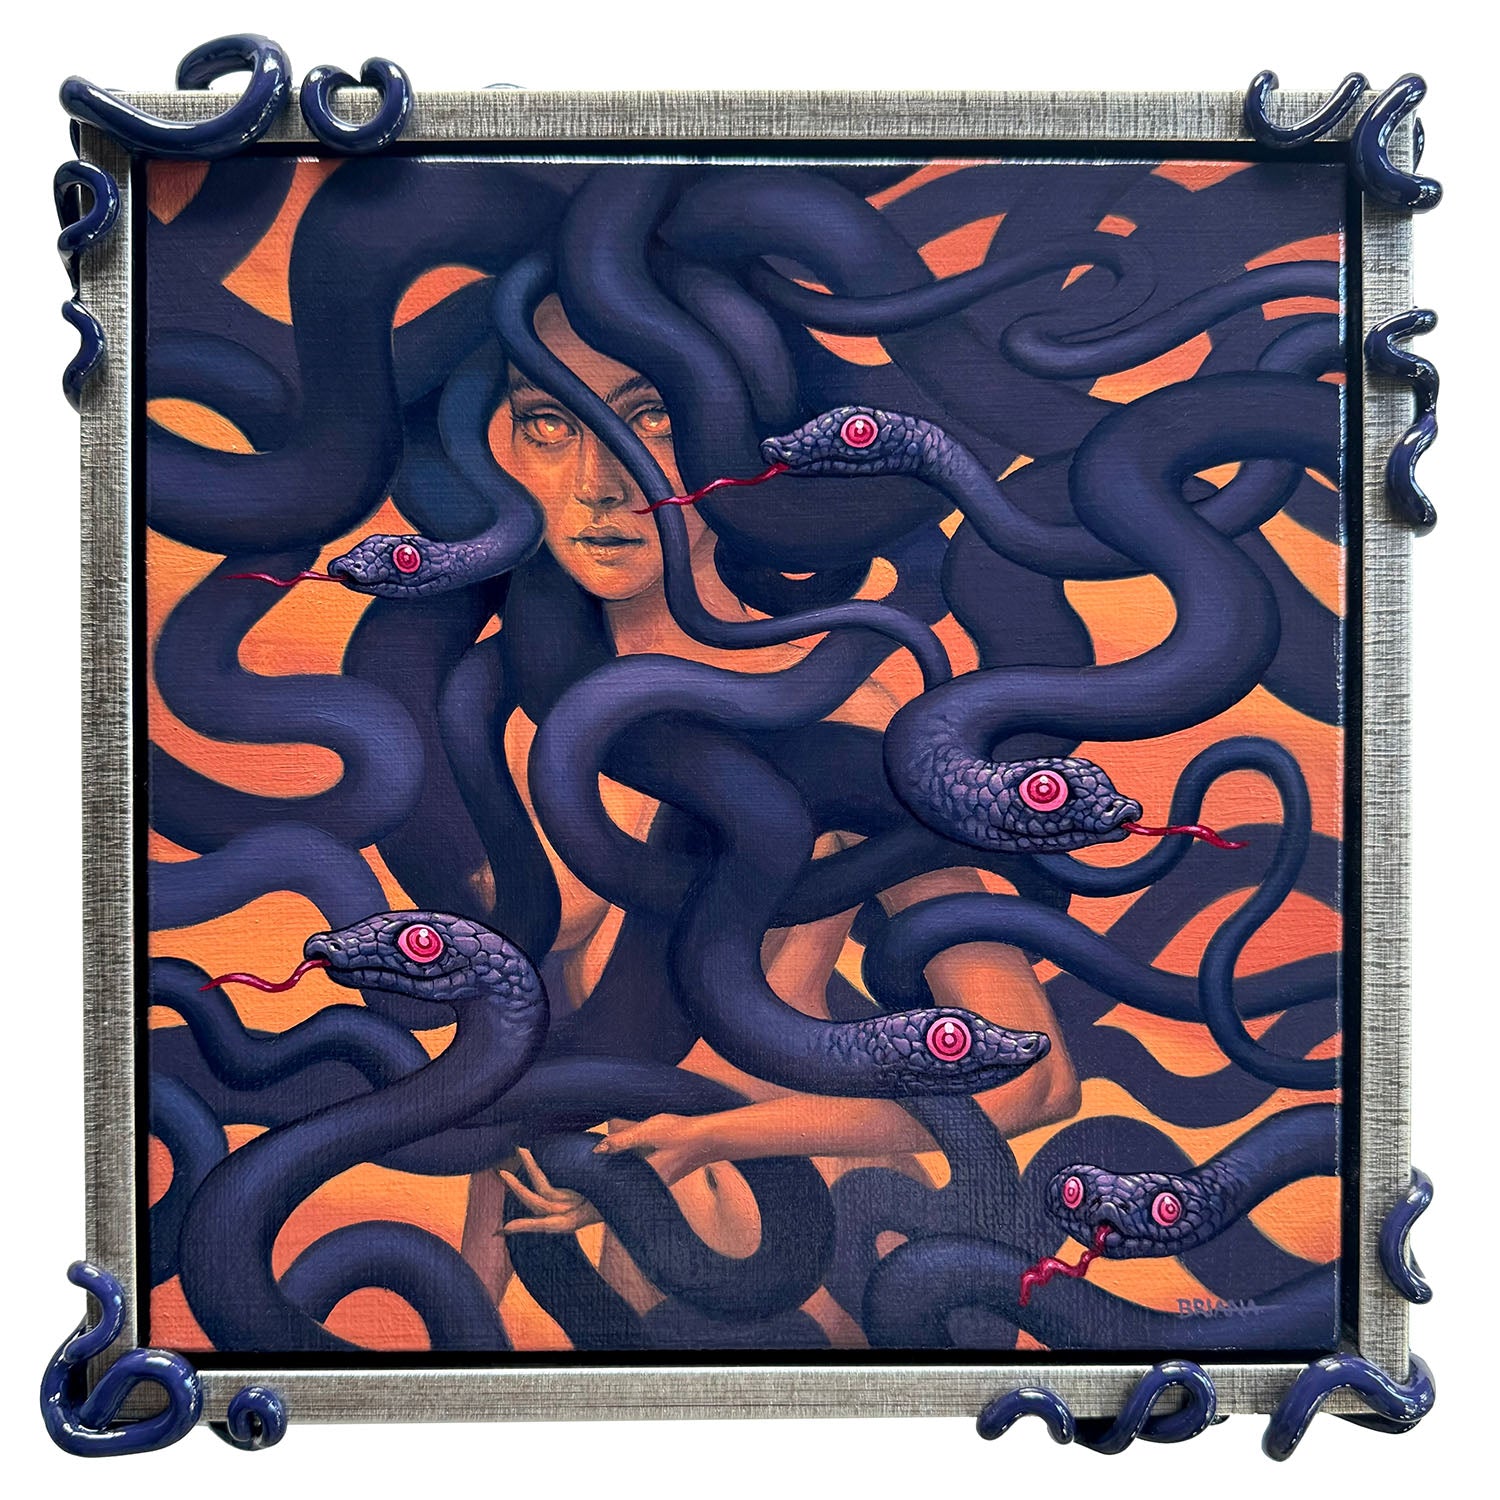 Painting on red ochre of a female medusa figure enshrouded with purple snakes with their red tongues out.